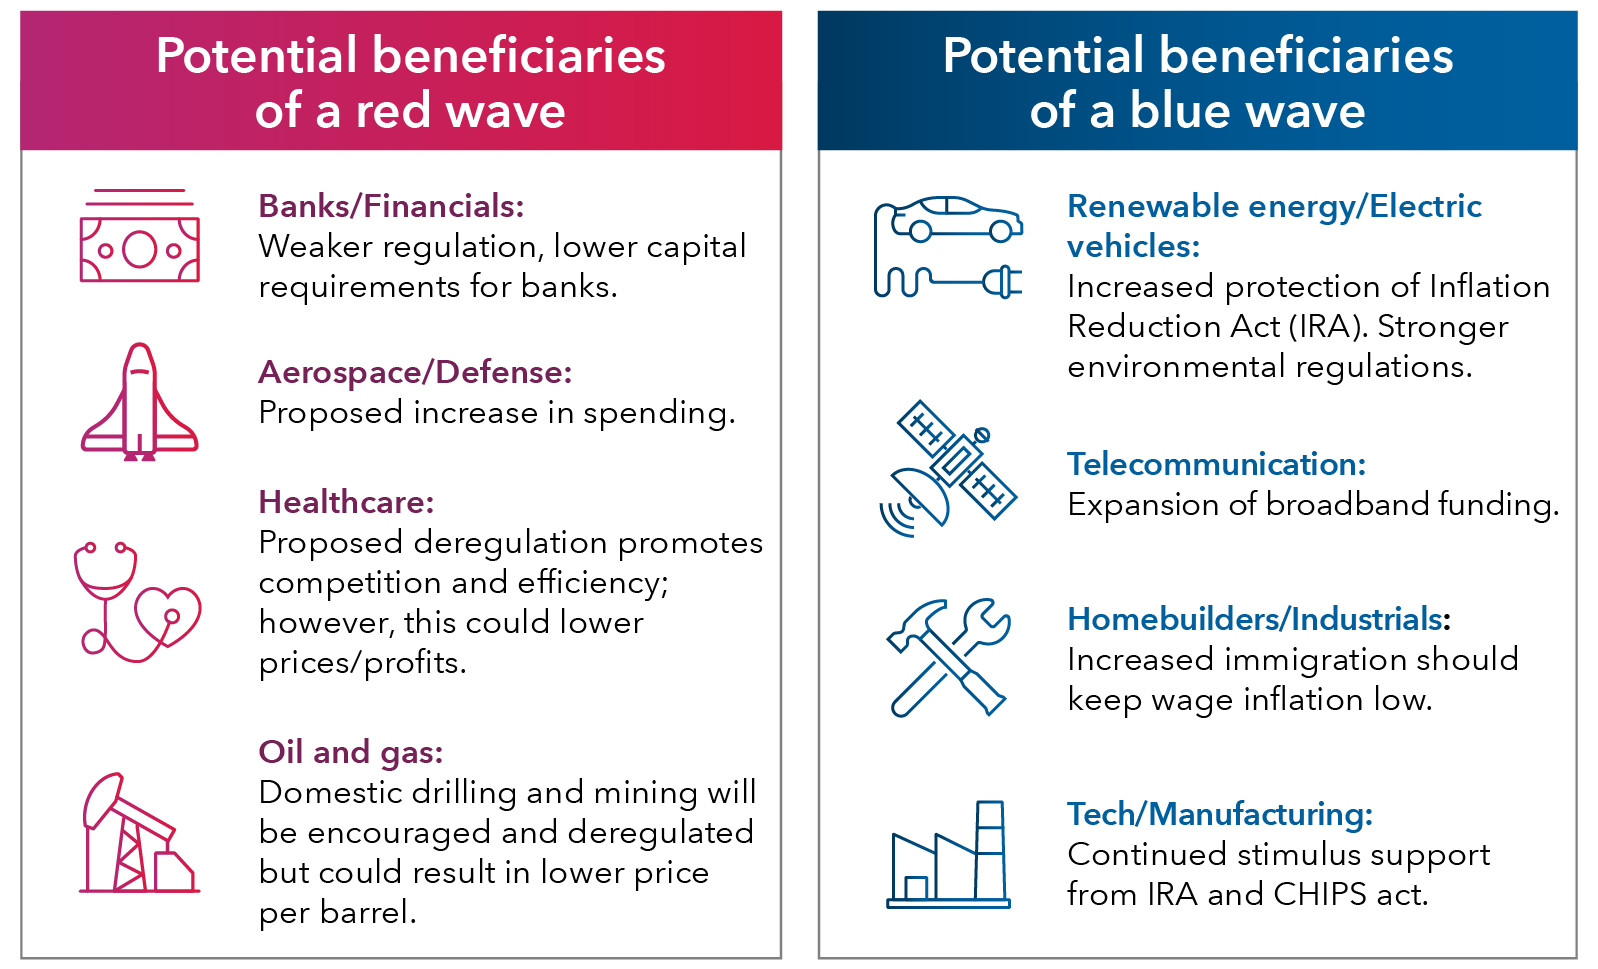 Chart shows a table comparing potential beneficiaries of a red wave or blue wave election. Under the blue wave section, it lists: 1) Renewable energy/Electric vehicles: Increased protection of Inflation Reduction Act (IRA). Stronger environmental regulations. 2) Telecommunication: Expansion of broadband funding.  3) Homebuilders/Industrials: Increased immigration should keep wage inflation low 4) Tech/Manufacturing: Continued stimulus support from IRA/CHIPS acts. Under the red wave section, it lists: 1) Banks/Financials: Weaker regulation, lower capital requirements for banks. 2) Aerospace/Defense: Proposed increase in spending. 3) Healthcare: Proposed deregulation promotes competition and efficiency; however, this could lower prices/profits. 4) Oil and gas: Domestic drilling and mining will be encouraged and deregulated but could result in lower price per barrel.